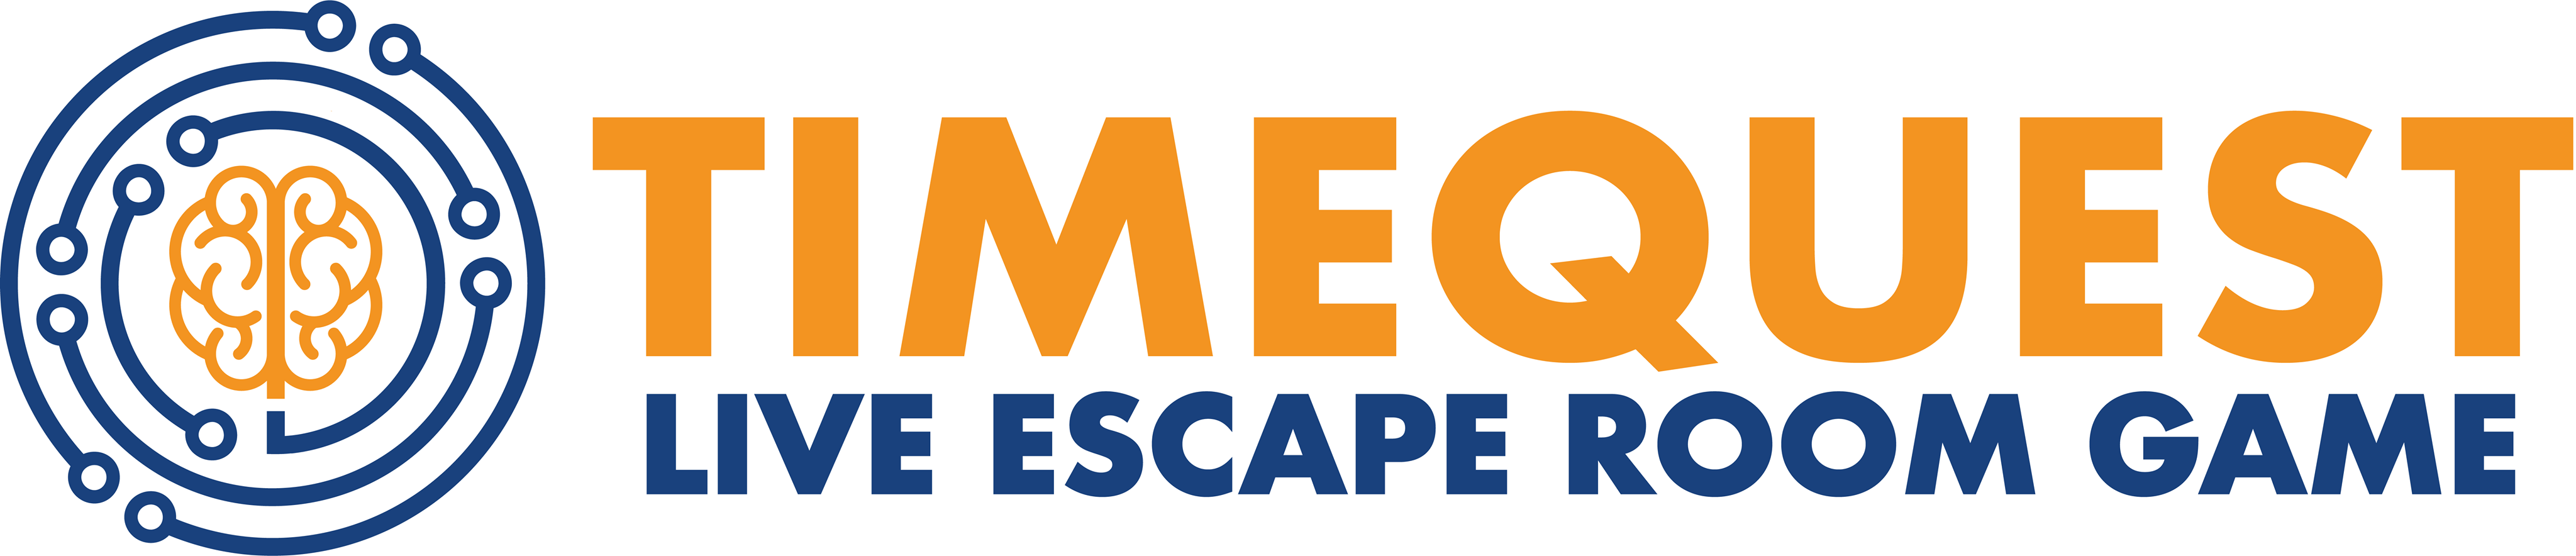 TIMEQUEST logo